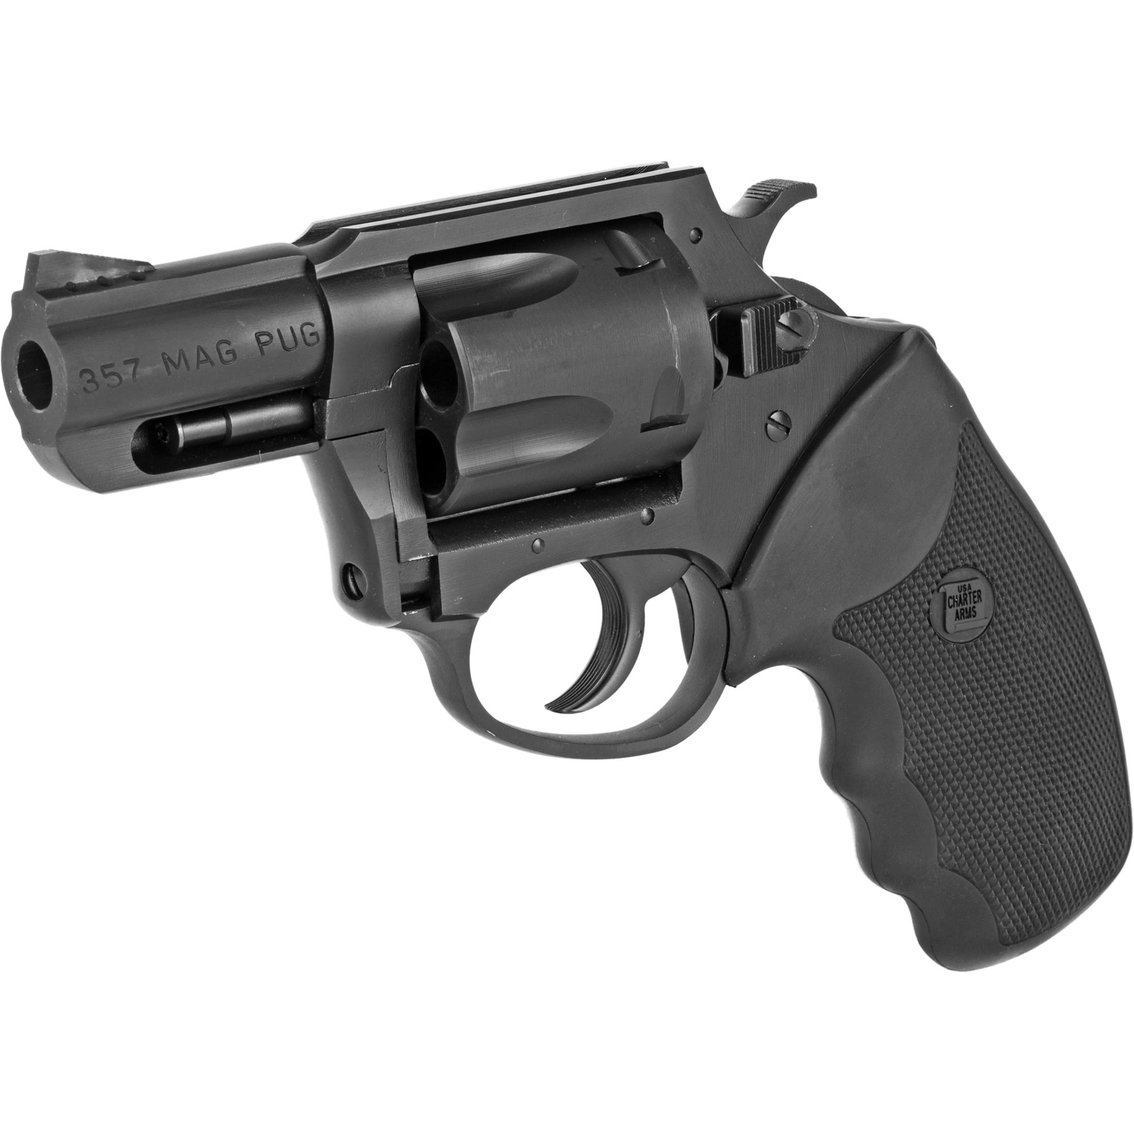 Charter Arms Mag Pug 357 Mag 2.2 in. Barrel 5 Rds Revolver Black - Image 3 of 3